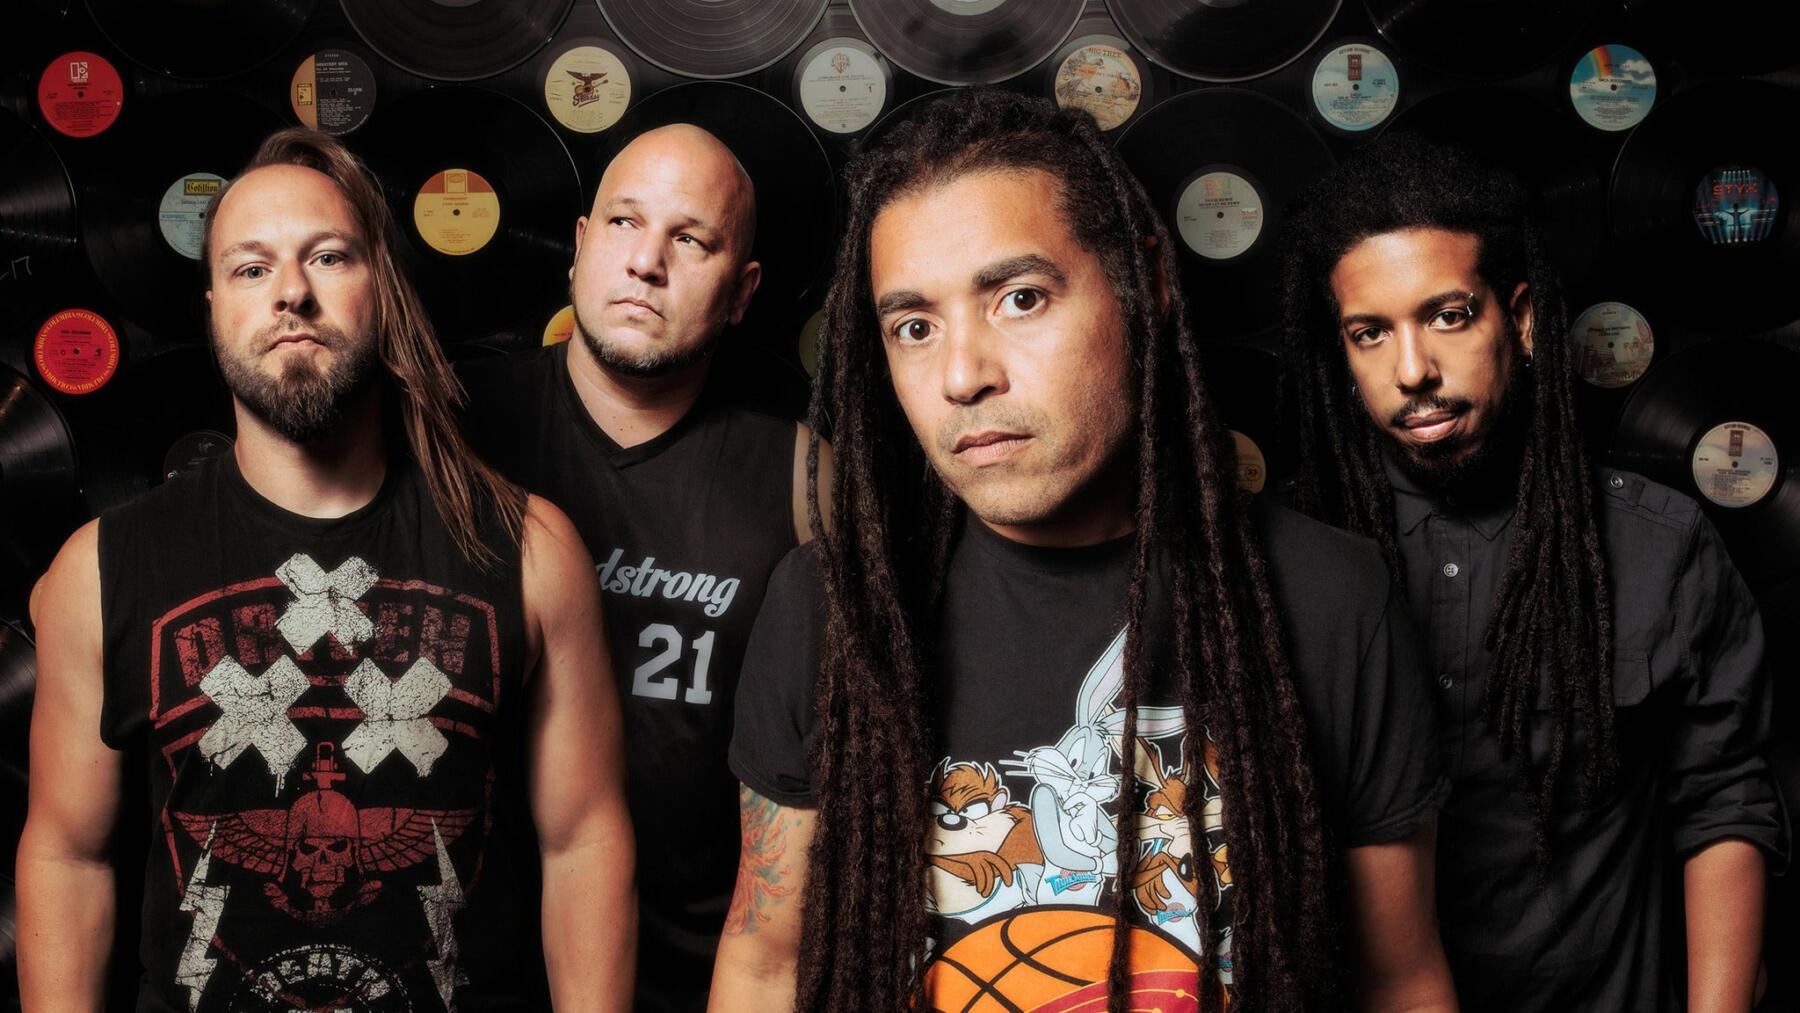 Nonpoint1